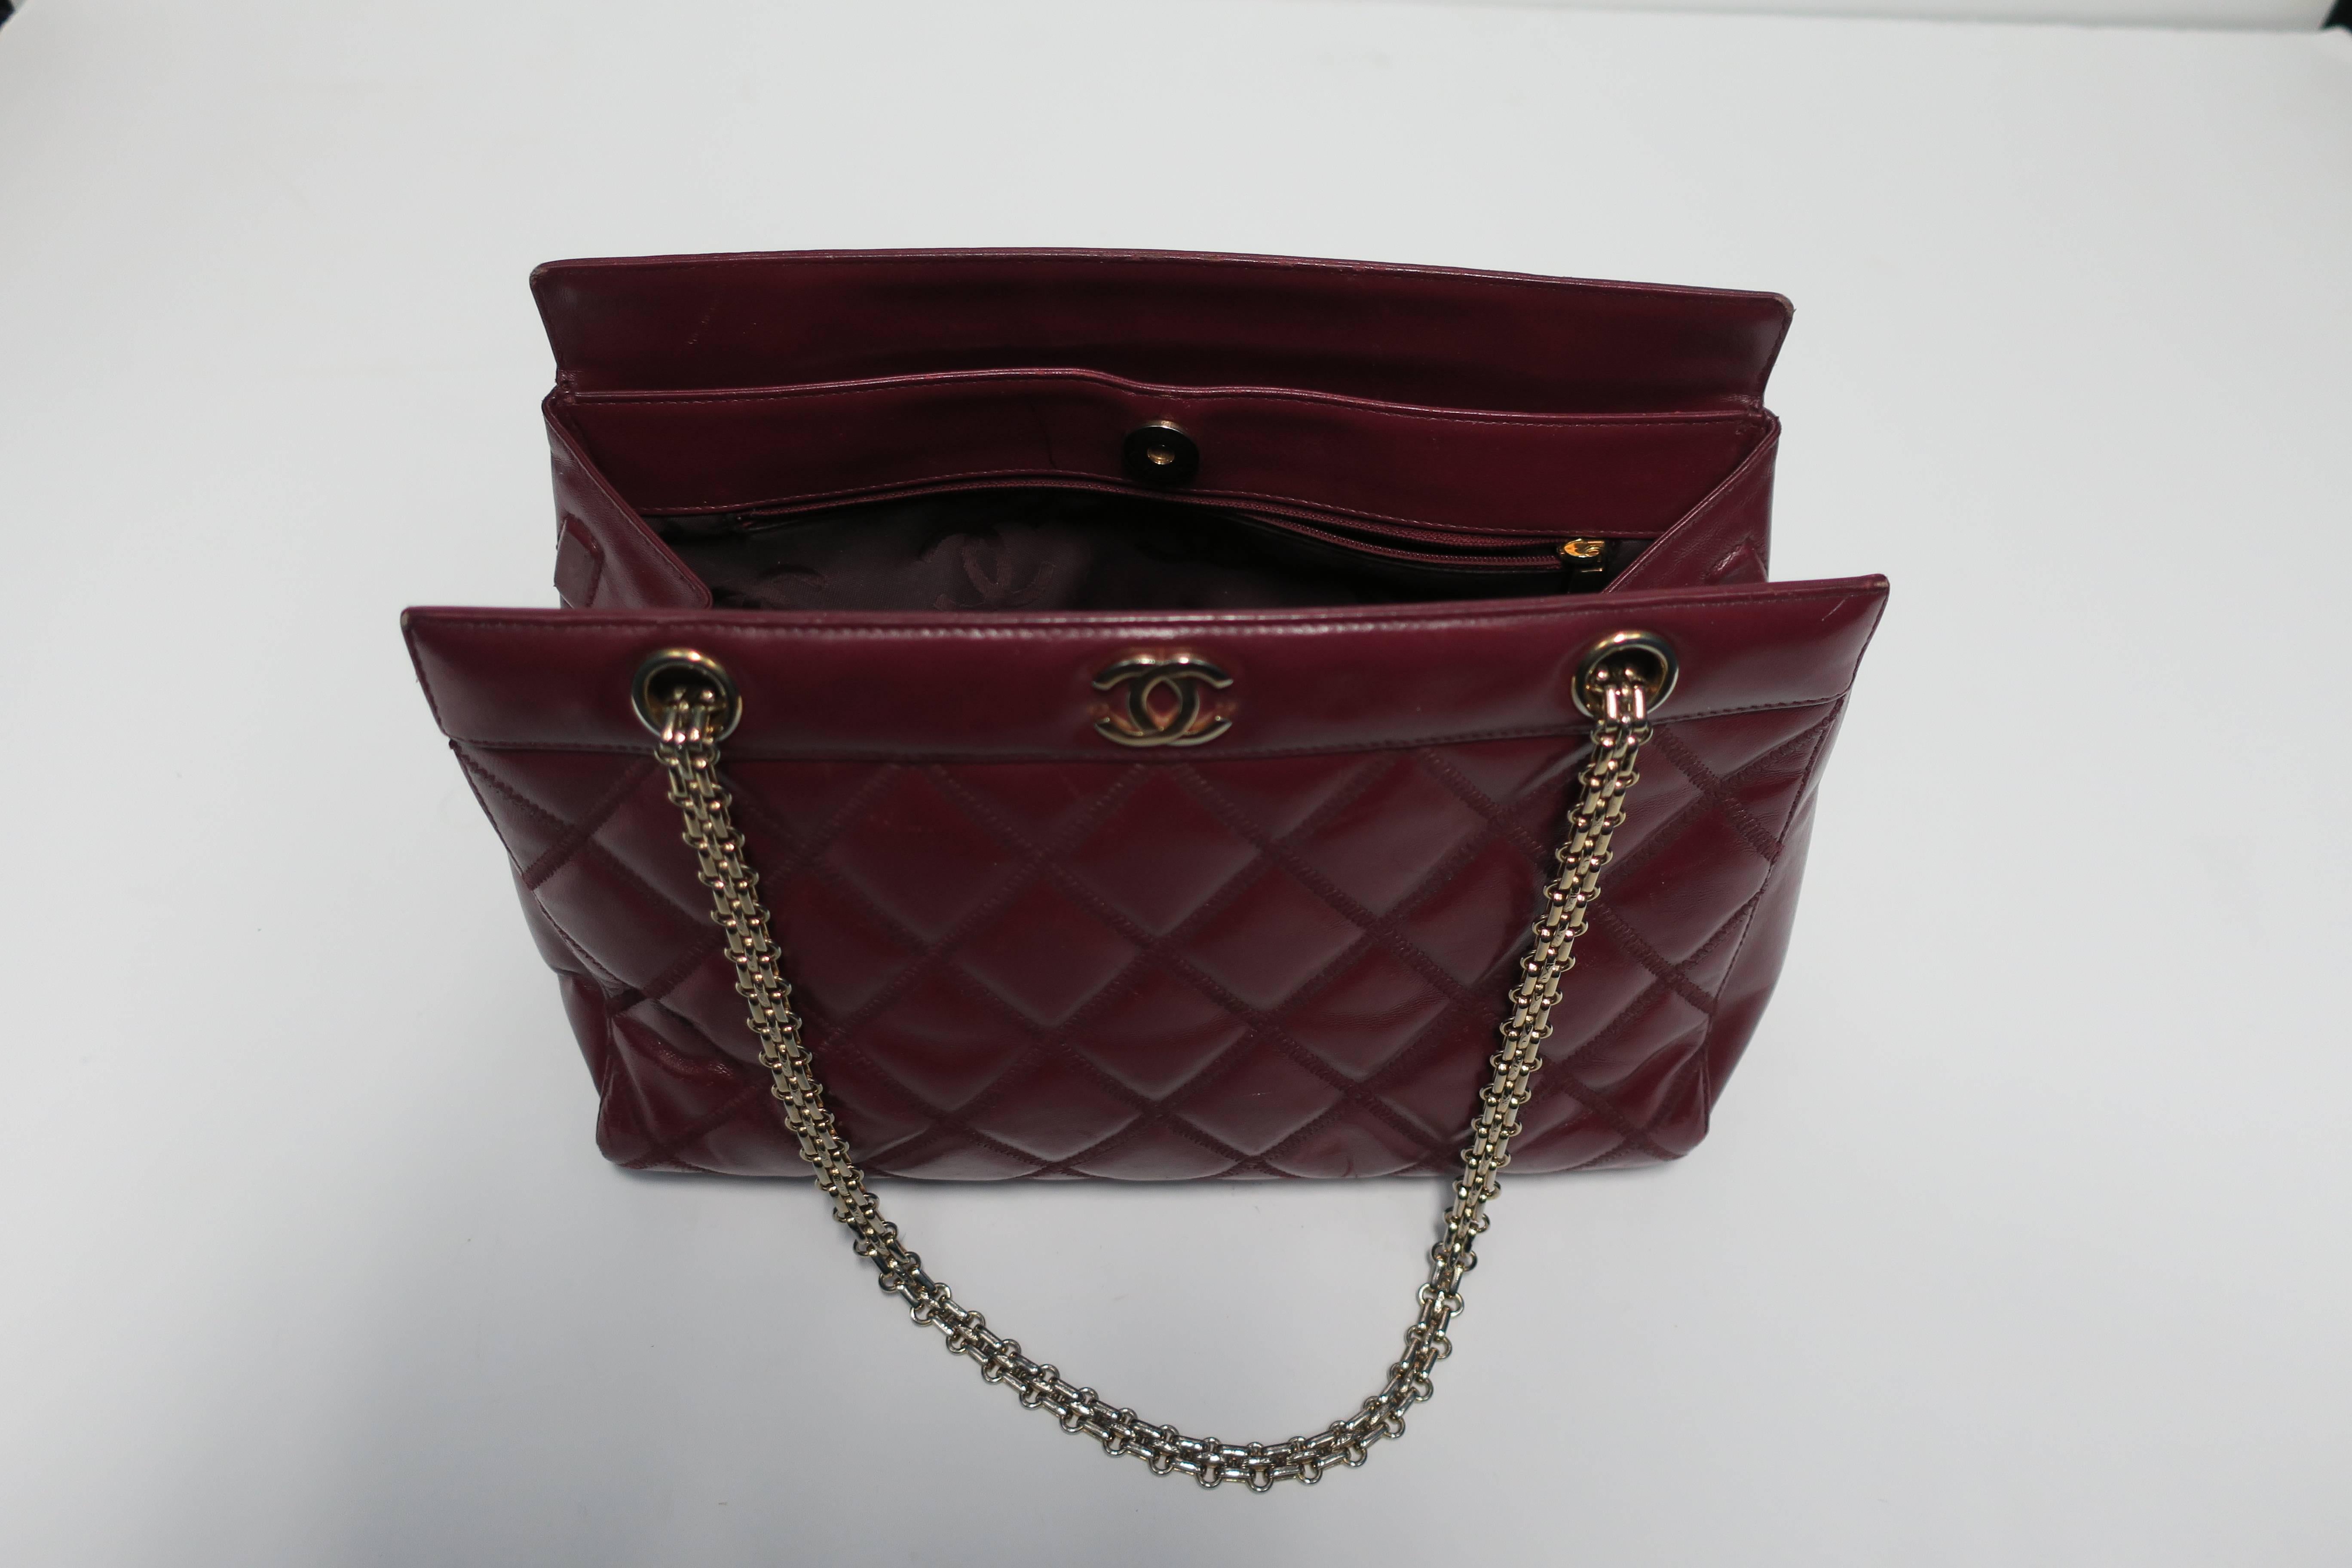 Late 20th Century Chanel Burgundy Red Leather Bag